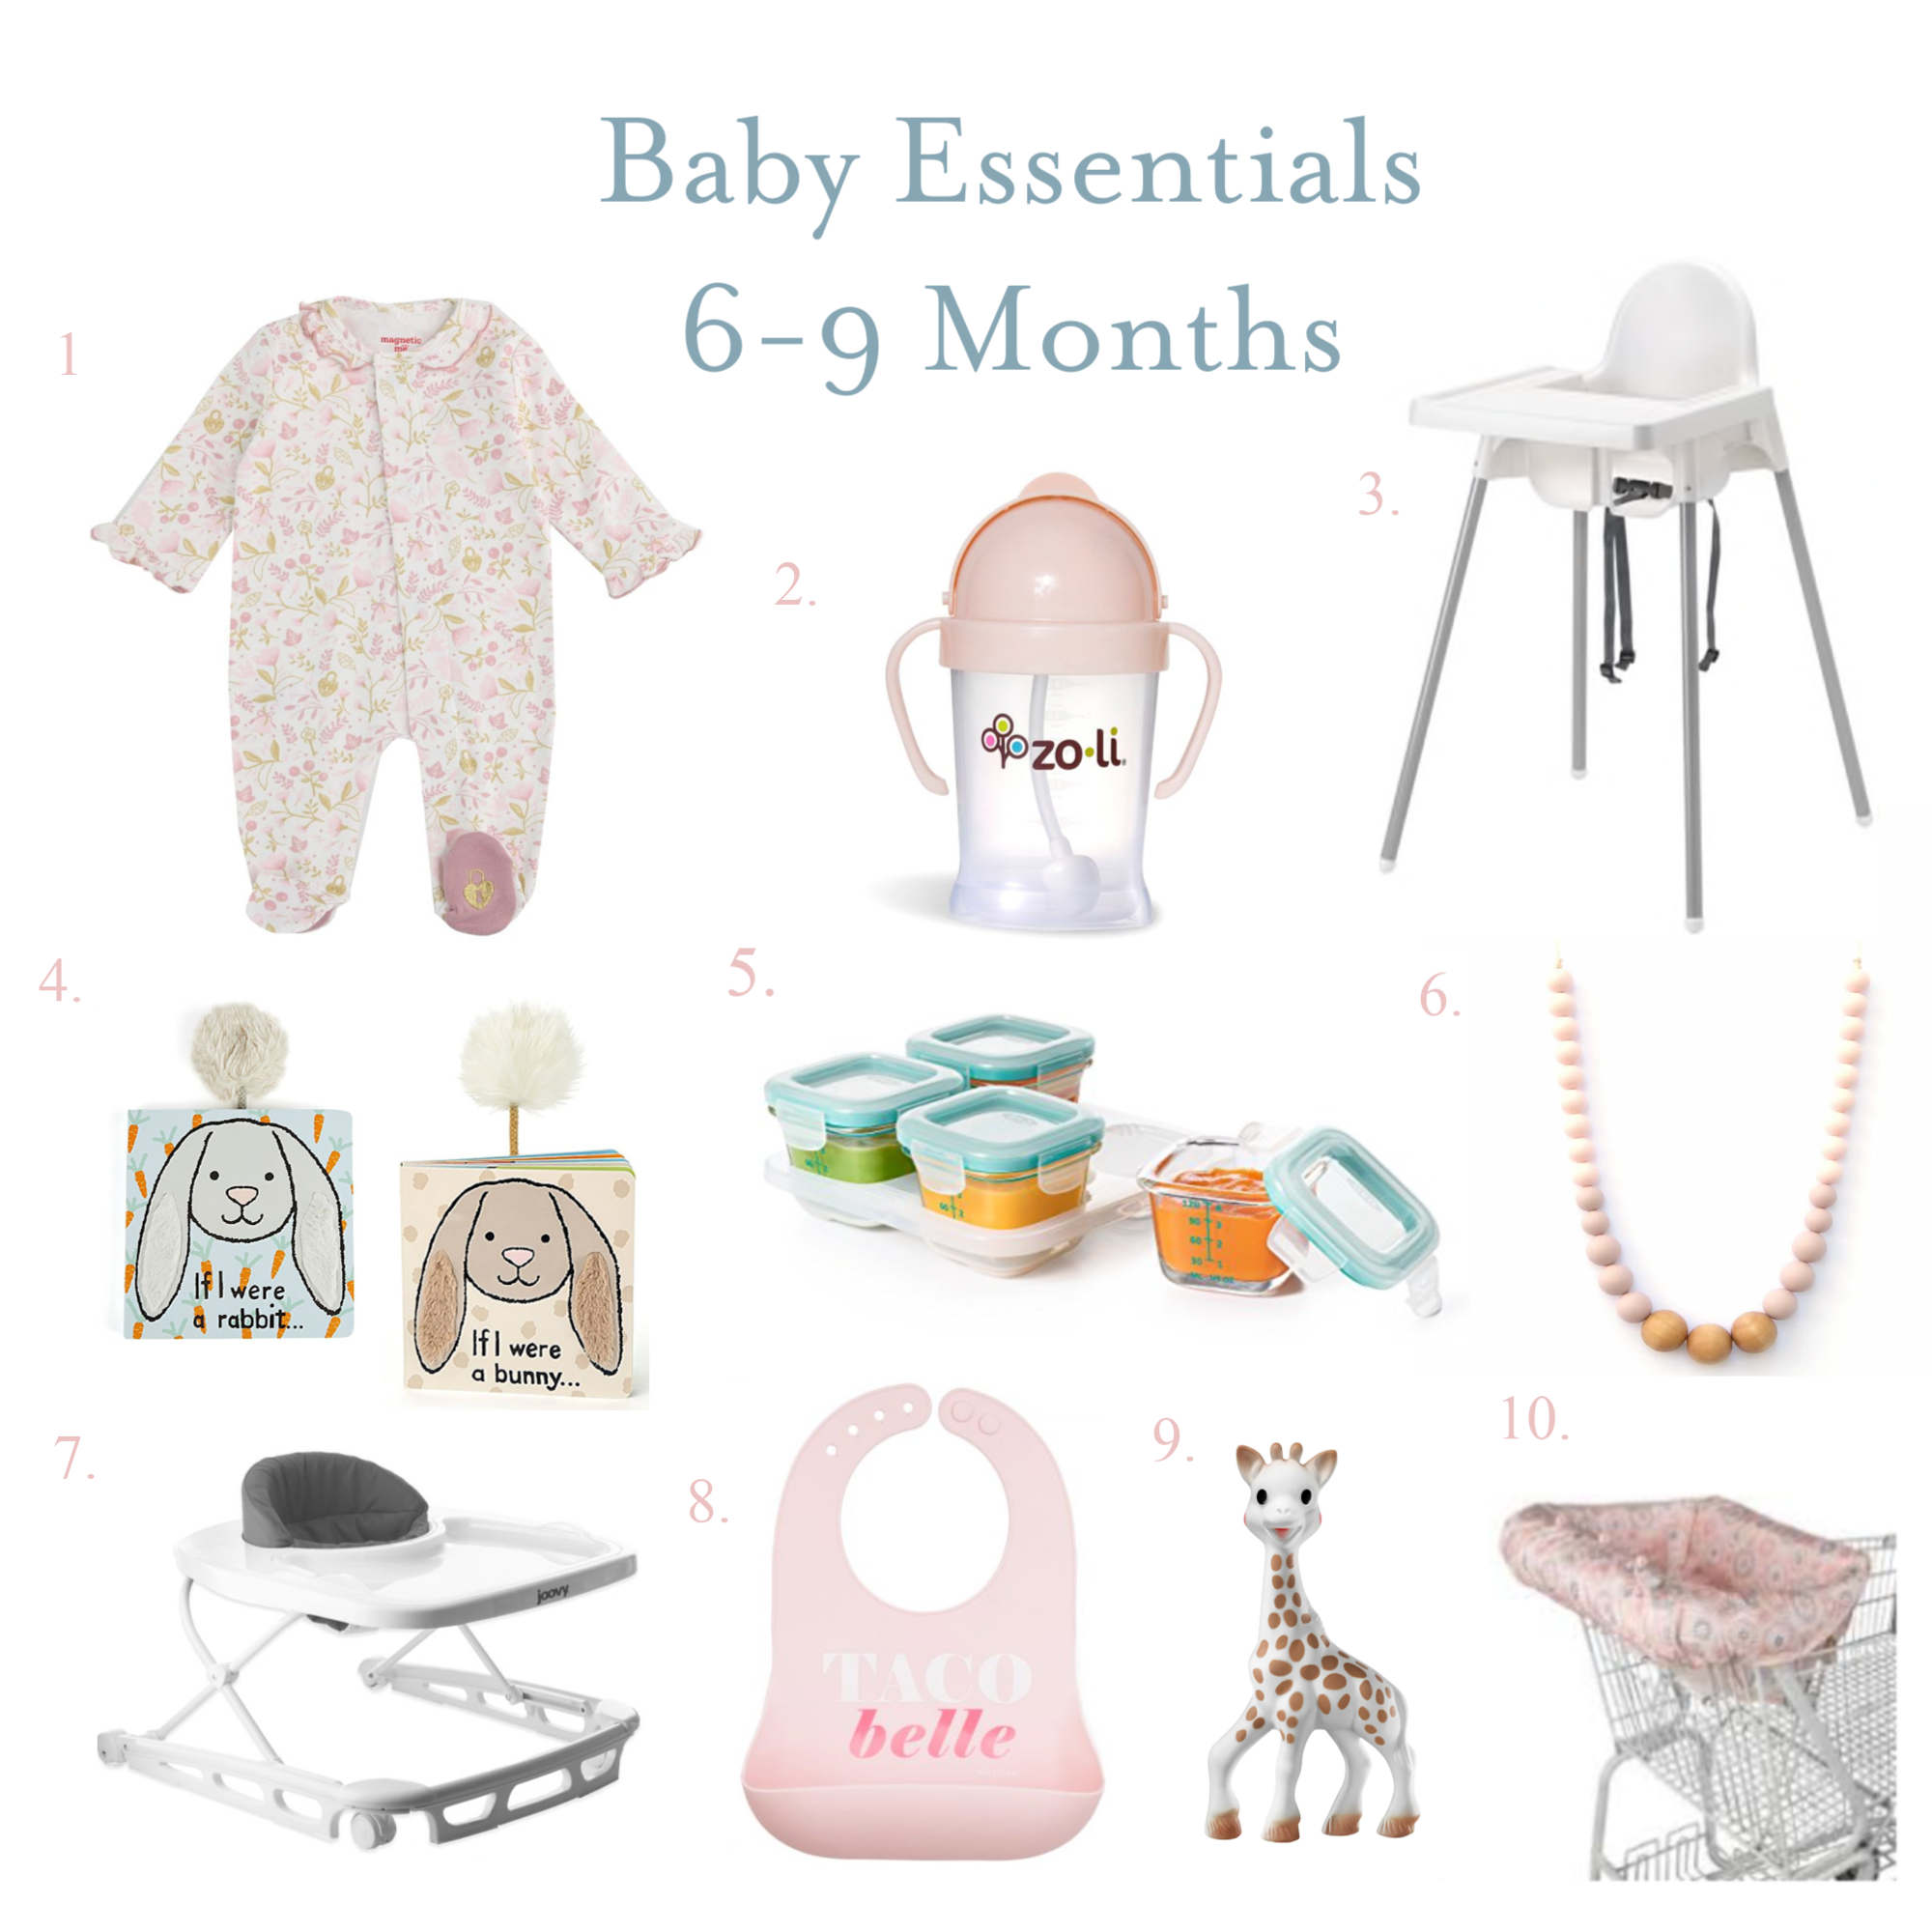 http://homesweethunter.com/wp-content/uploads/2018/10/Baby-Essentials-6-9-Months-7.png